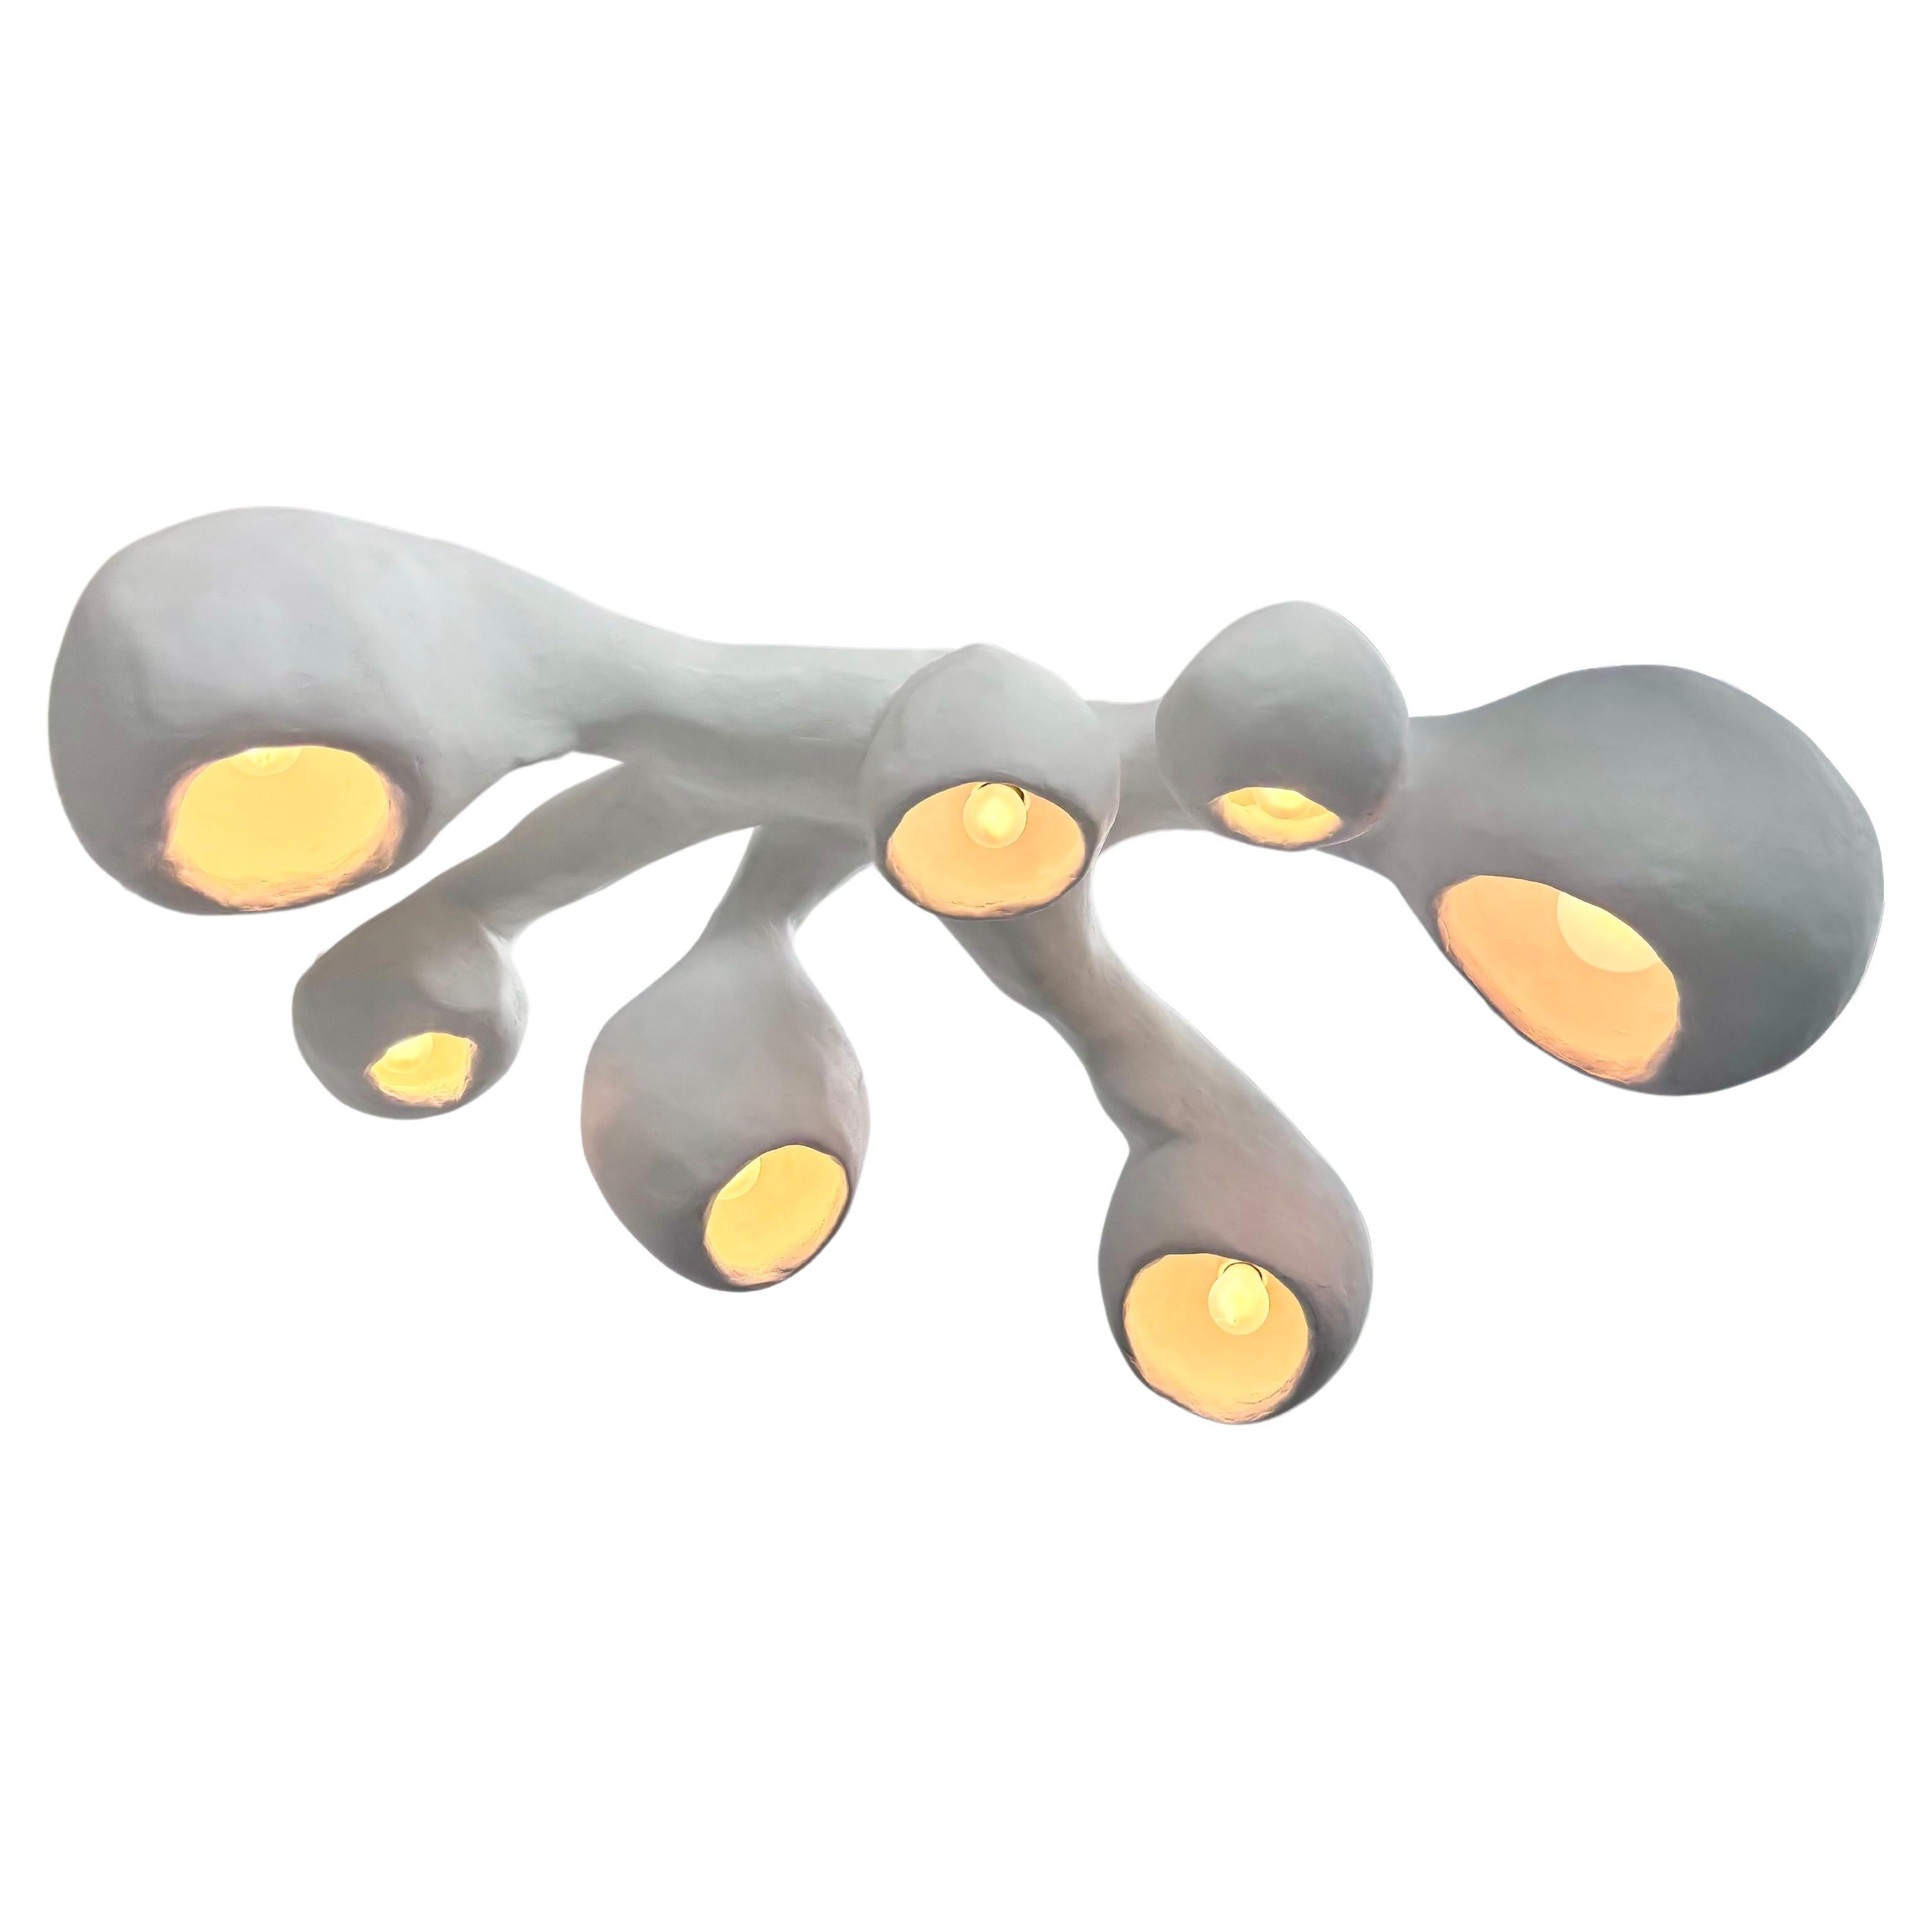 Available now.  
Custom Design by Studio Chora, Biomorphic Series, current production. 
Biomorphic: ‘bios' meaning life and 'morphe' meaning form.

One-of-a-kind light fixture; the item shown is the item that will ship. The Biomorphic series of